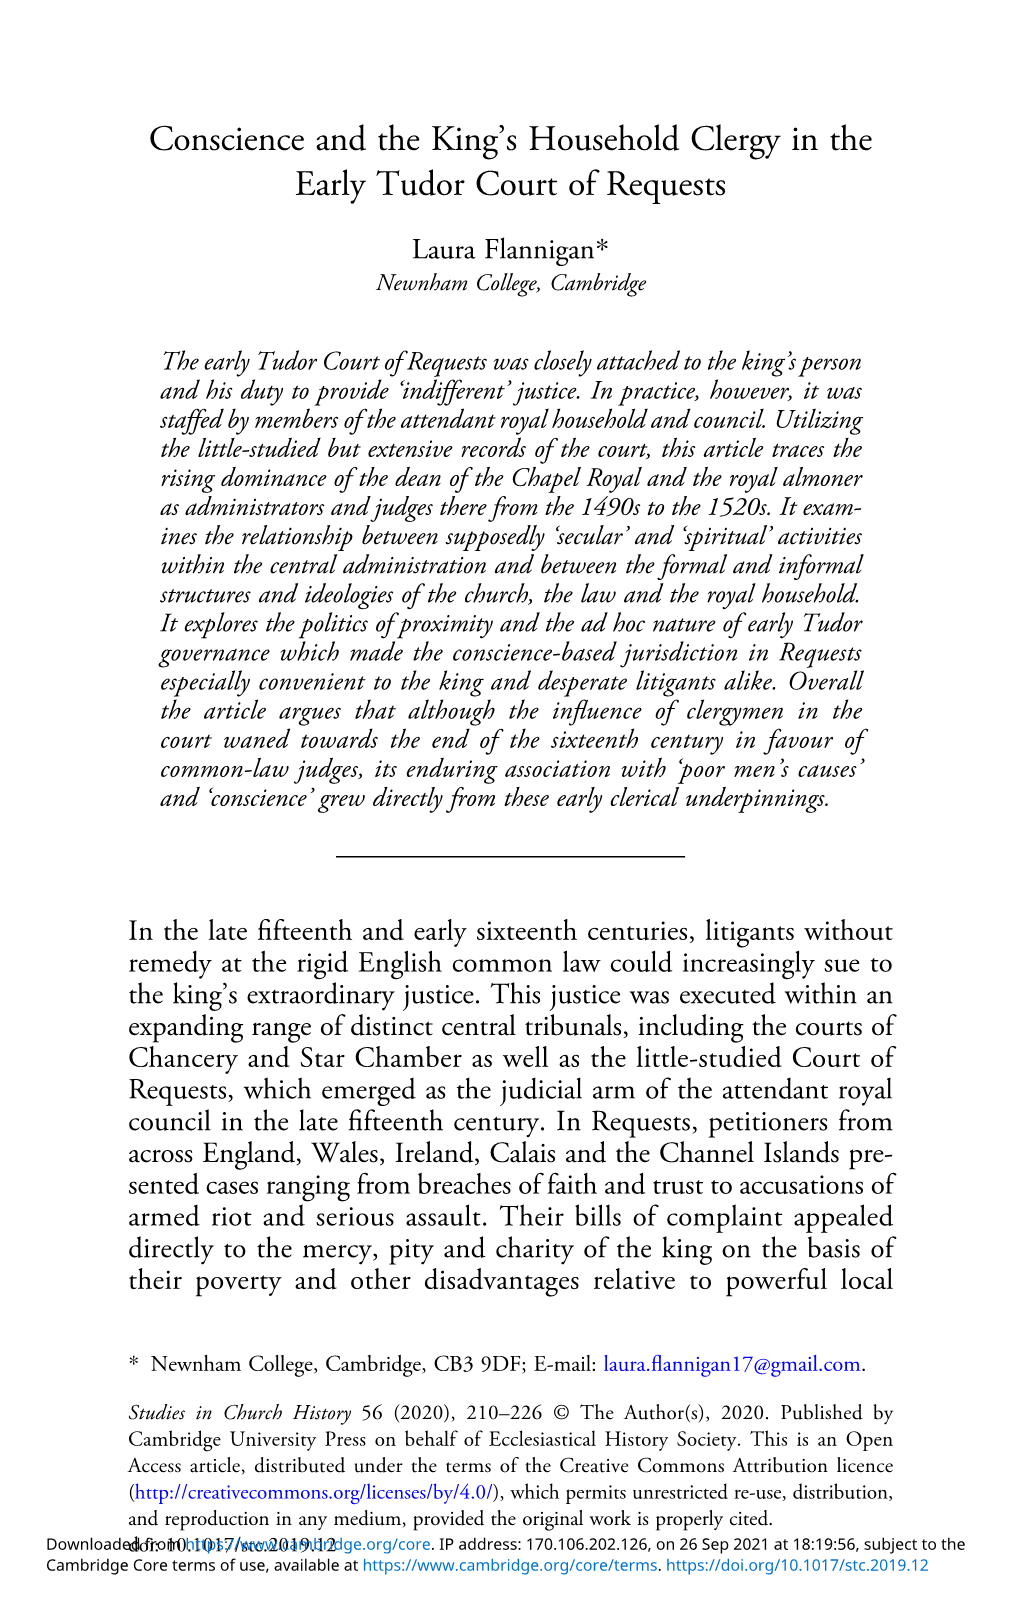 Conscience and the King's Household Clergy in the Early Tudor Court Of